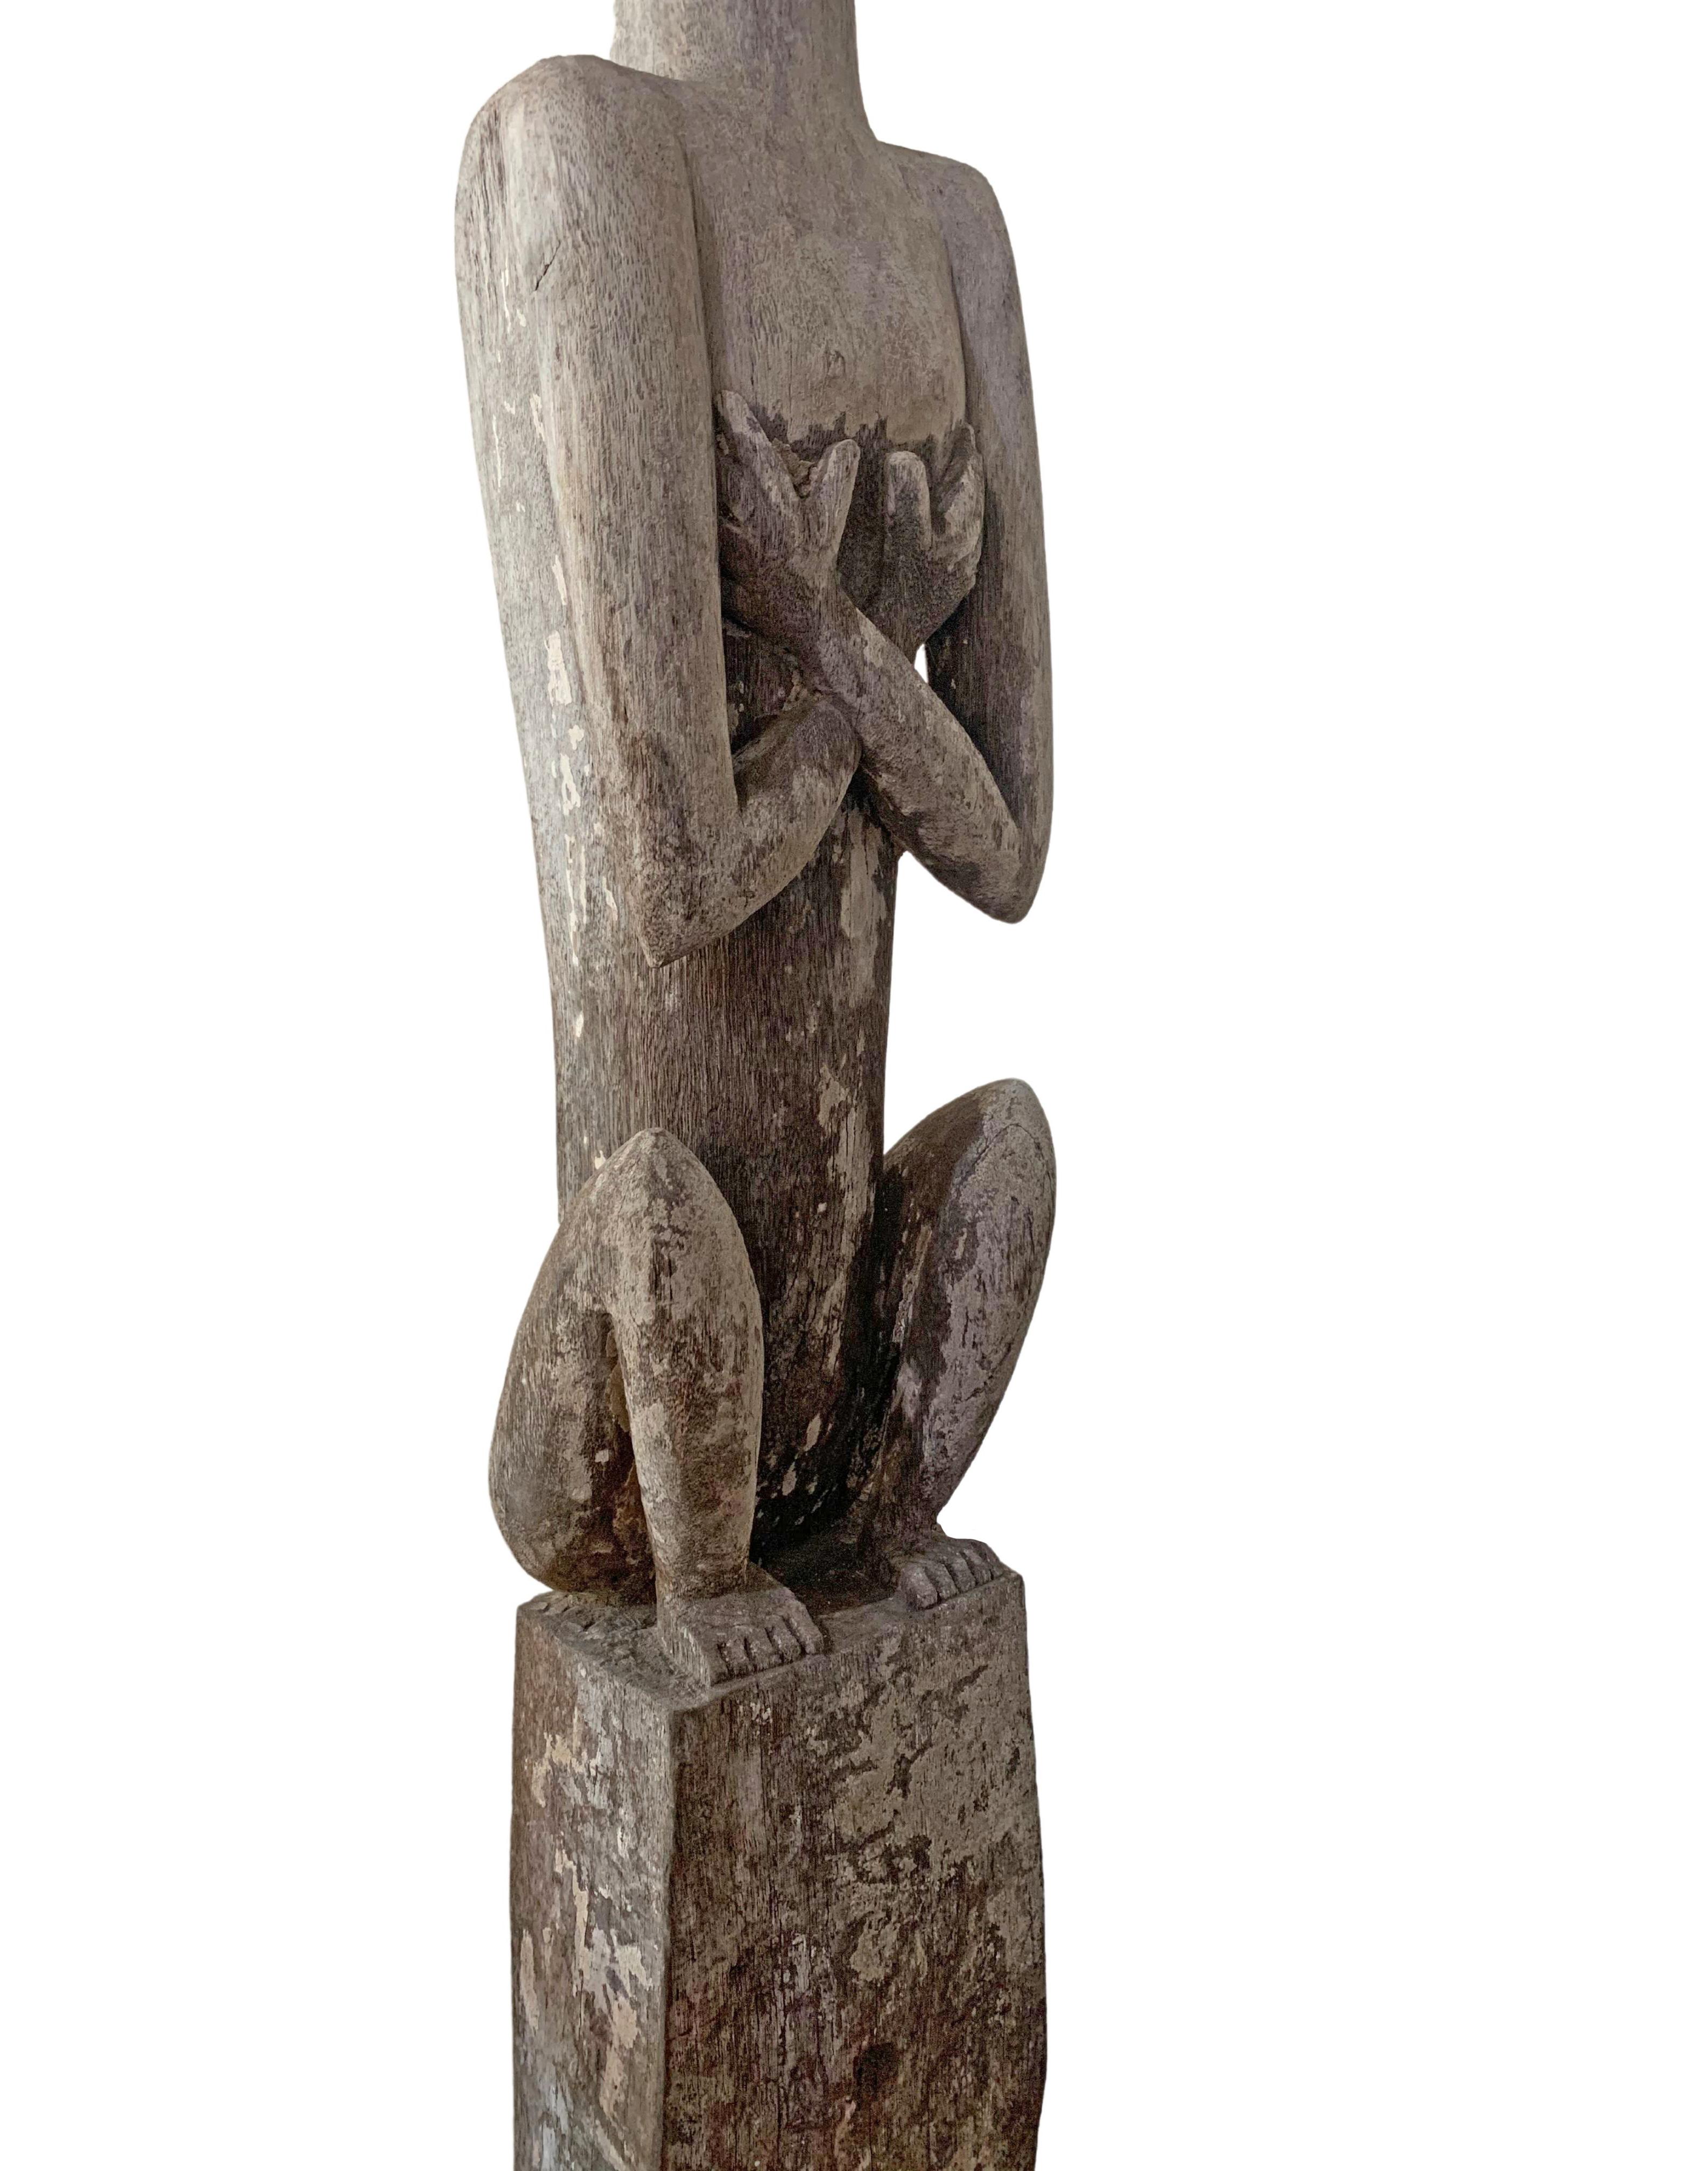 Wooden Tribal Sculpture / Carving of Ancestral Figure, Sumba Island, Indonesia 1